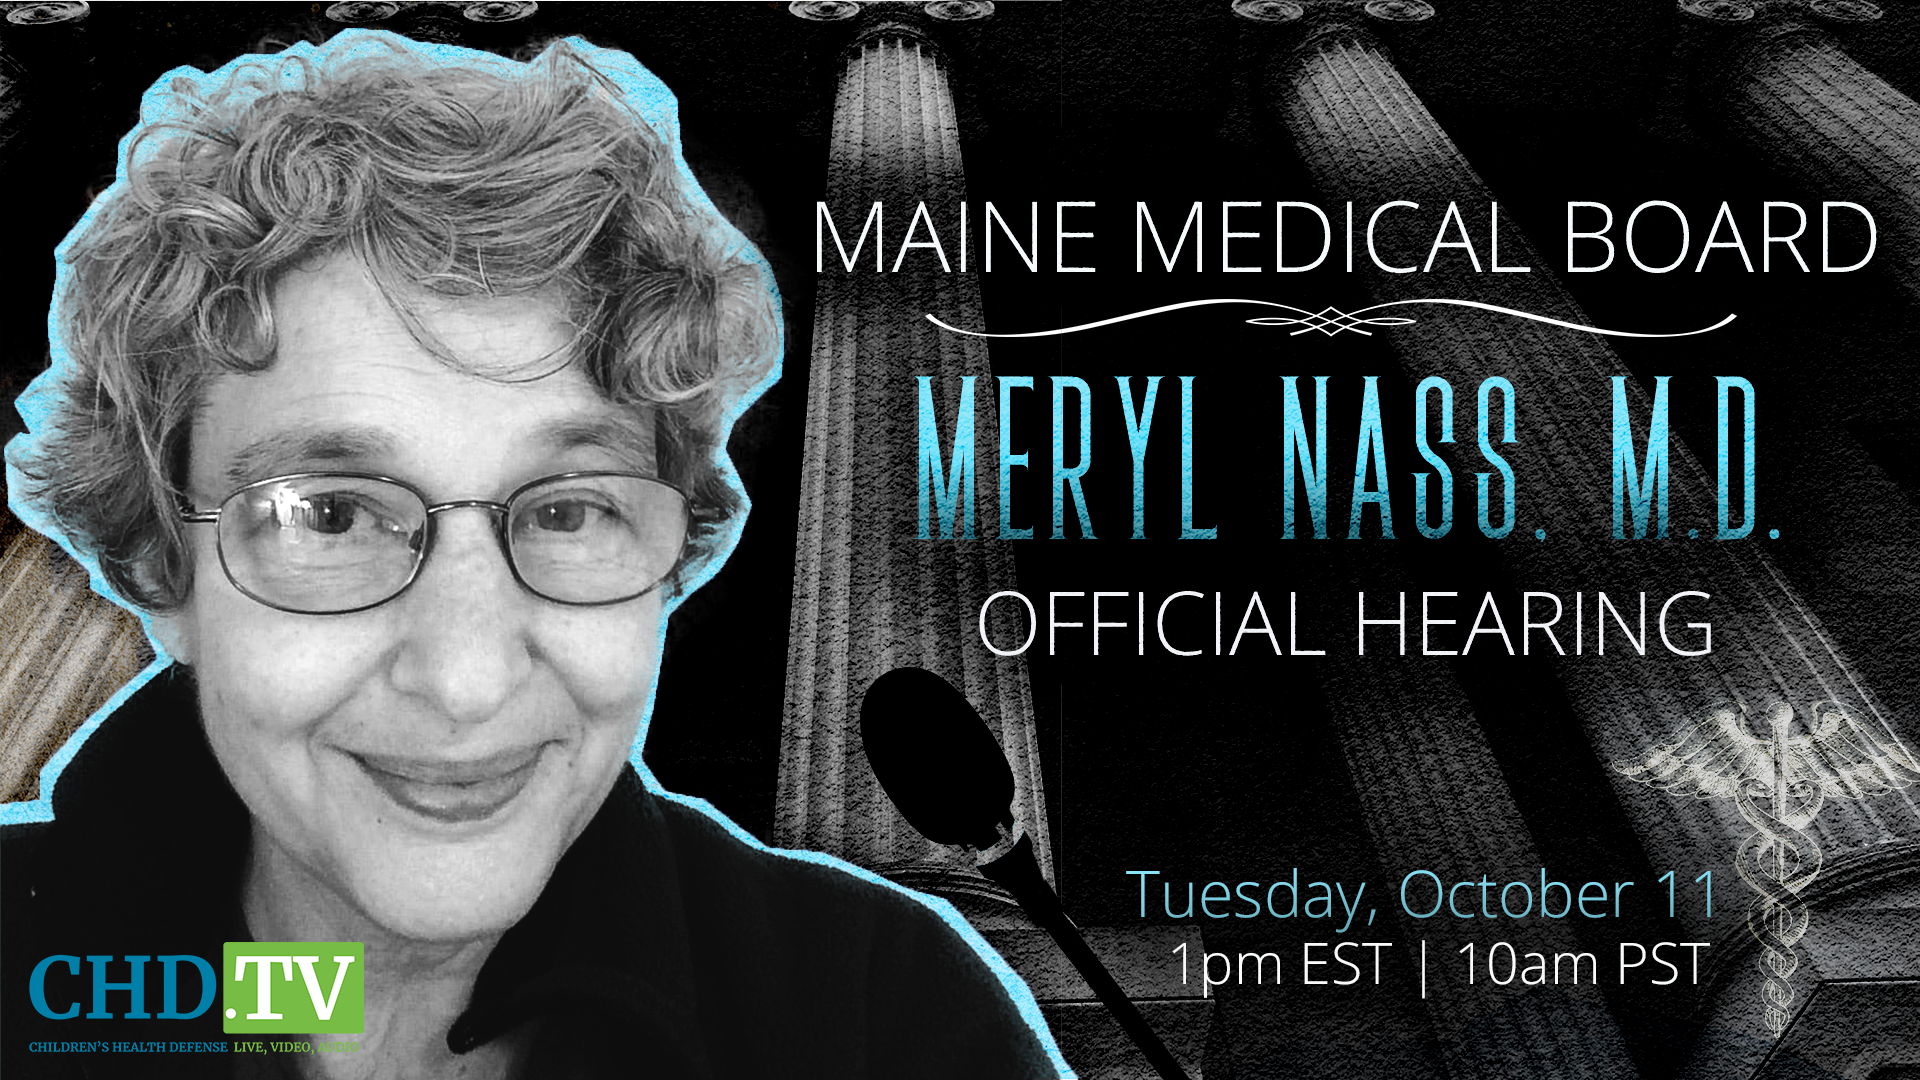 LIVESTREAM 1pm EST: Maine Medical Board — Meryl Nass, M.D. Official Hearing - Nass Fights Medical Tyranny For Practicing Real Medicine